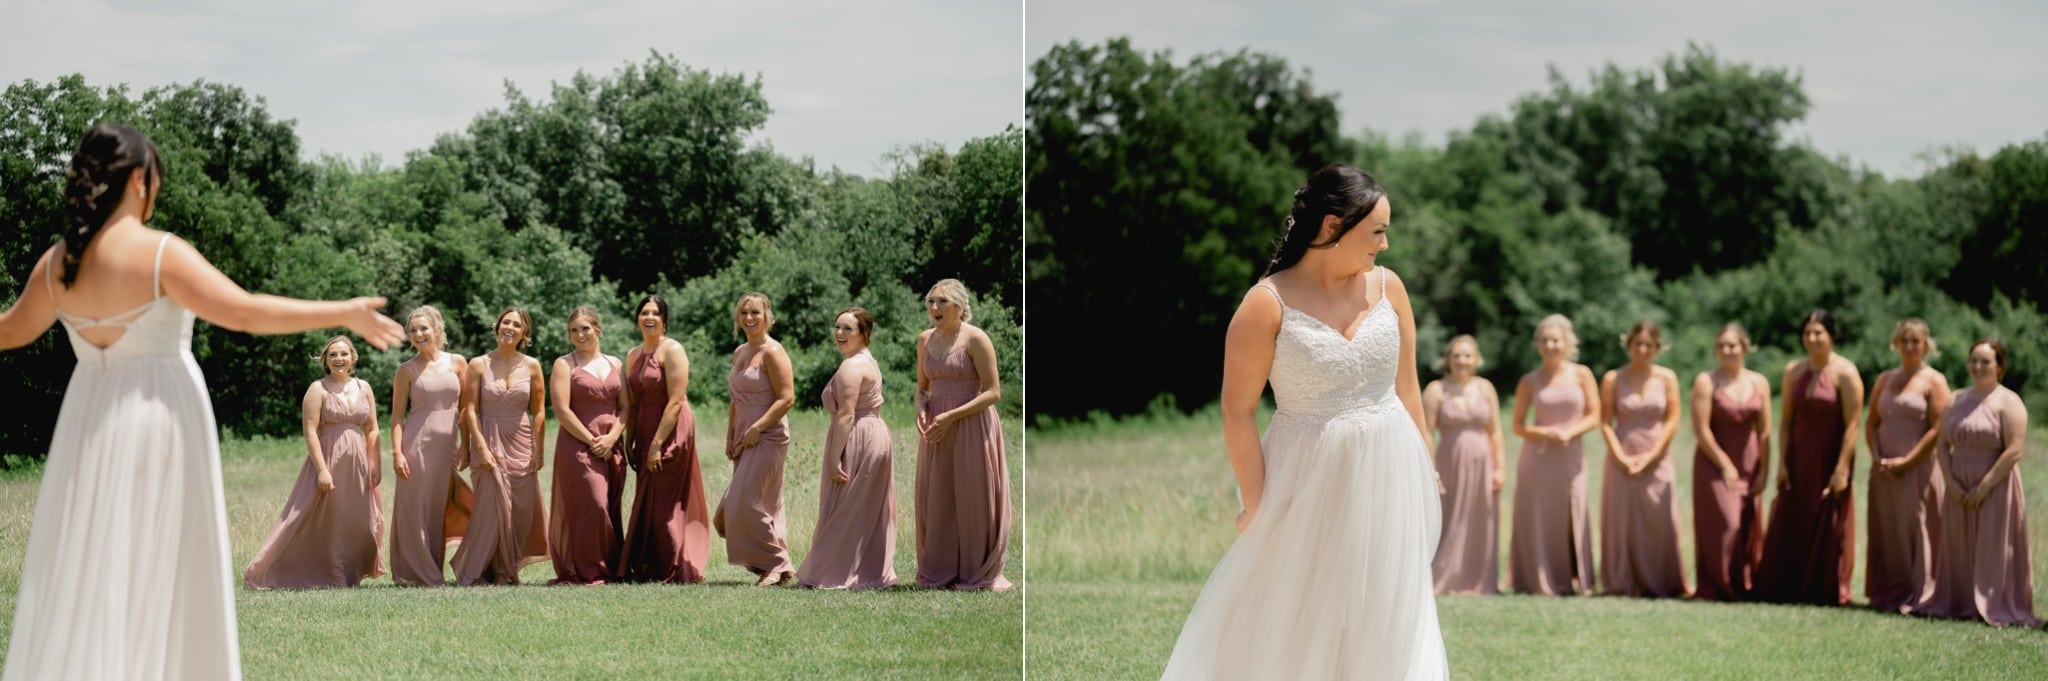 first look with bride and bridesmaids at red acre barn